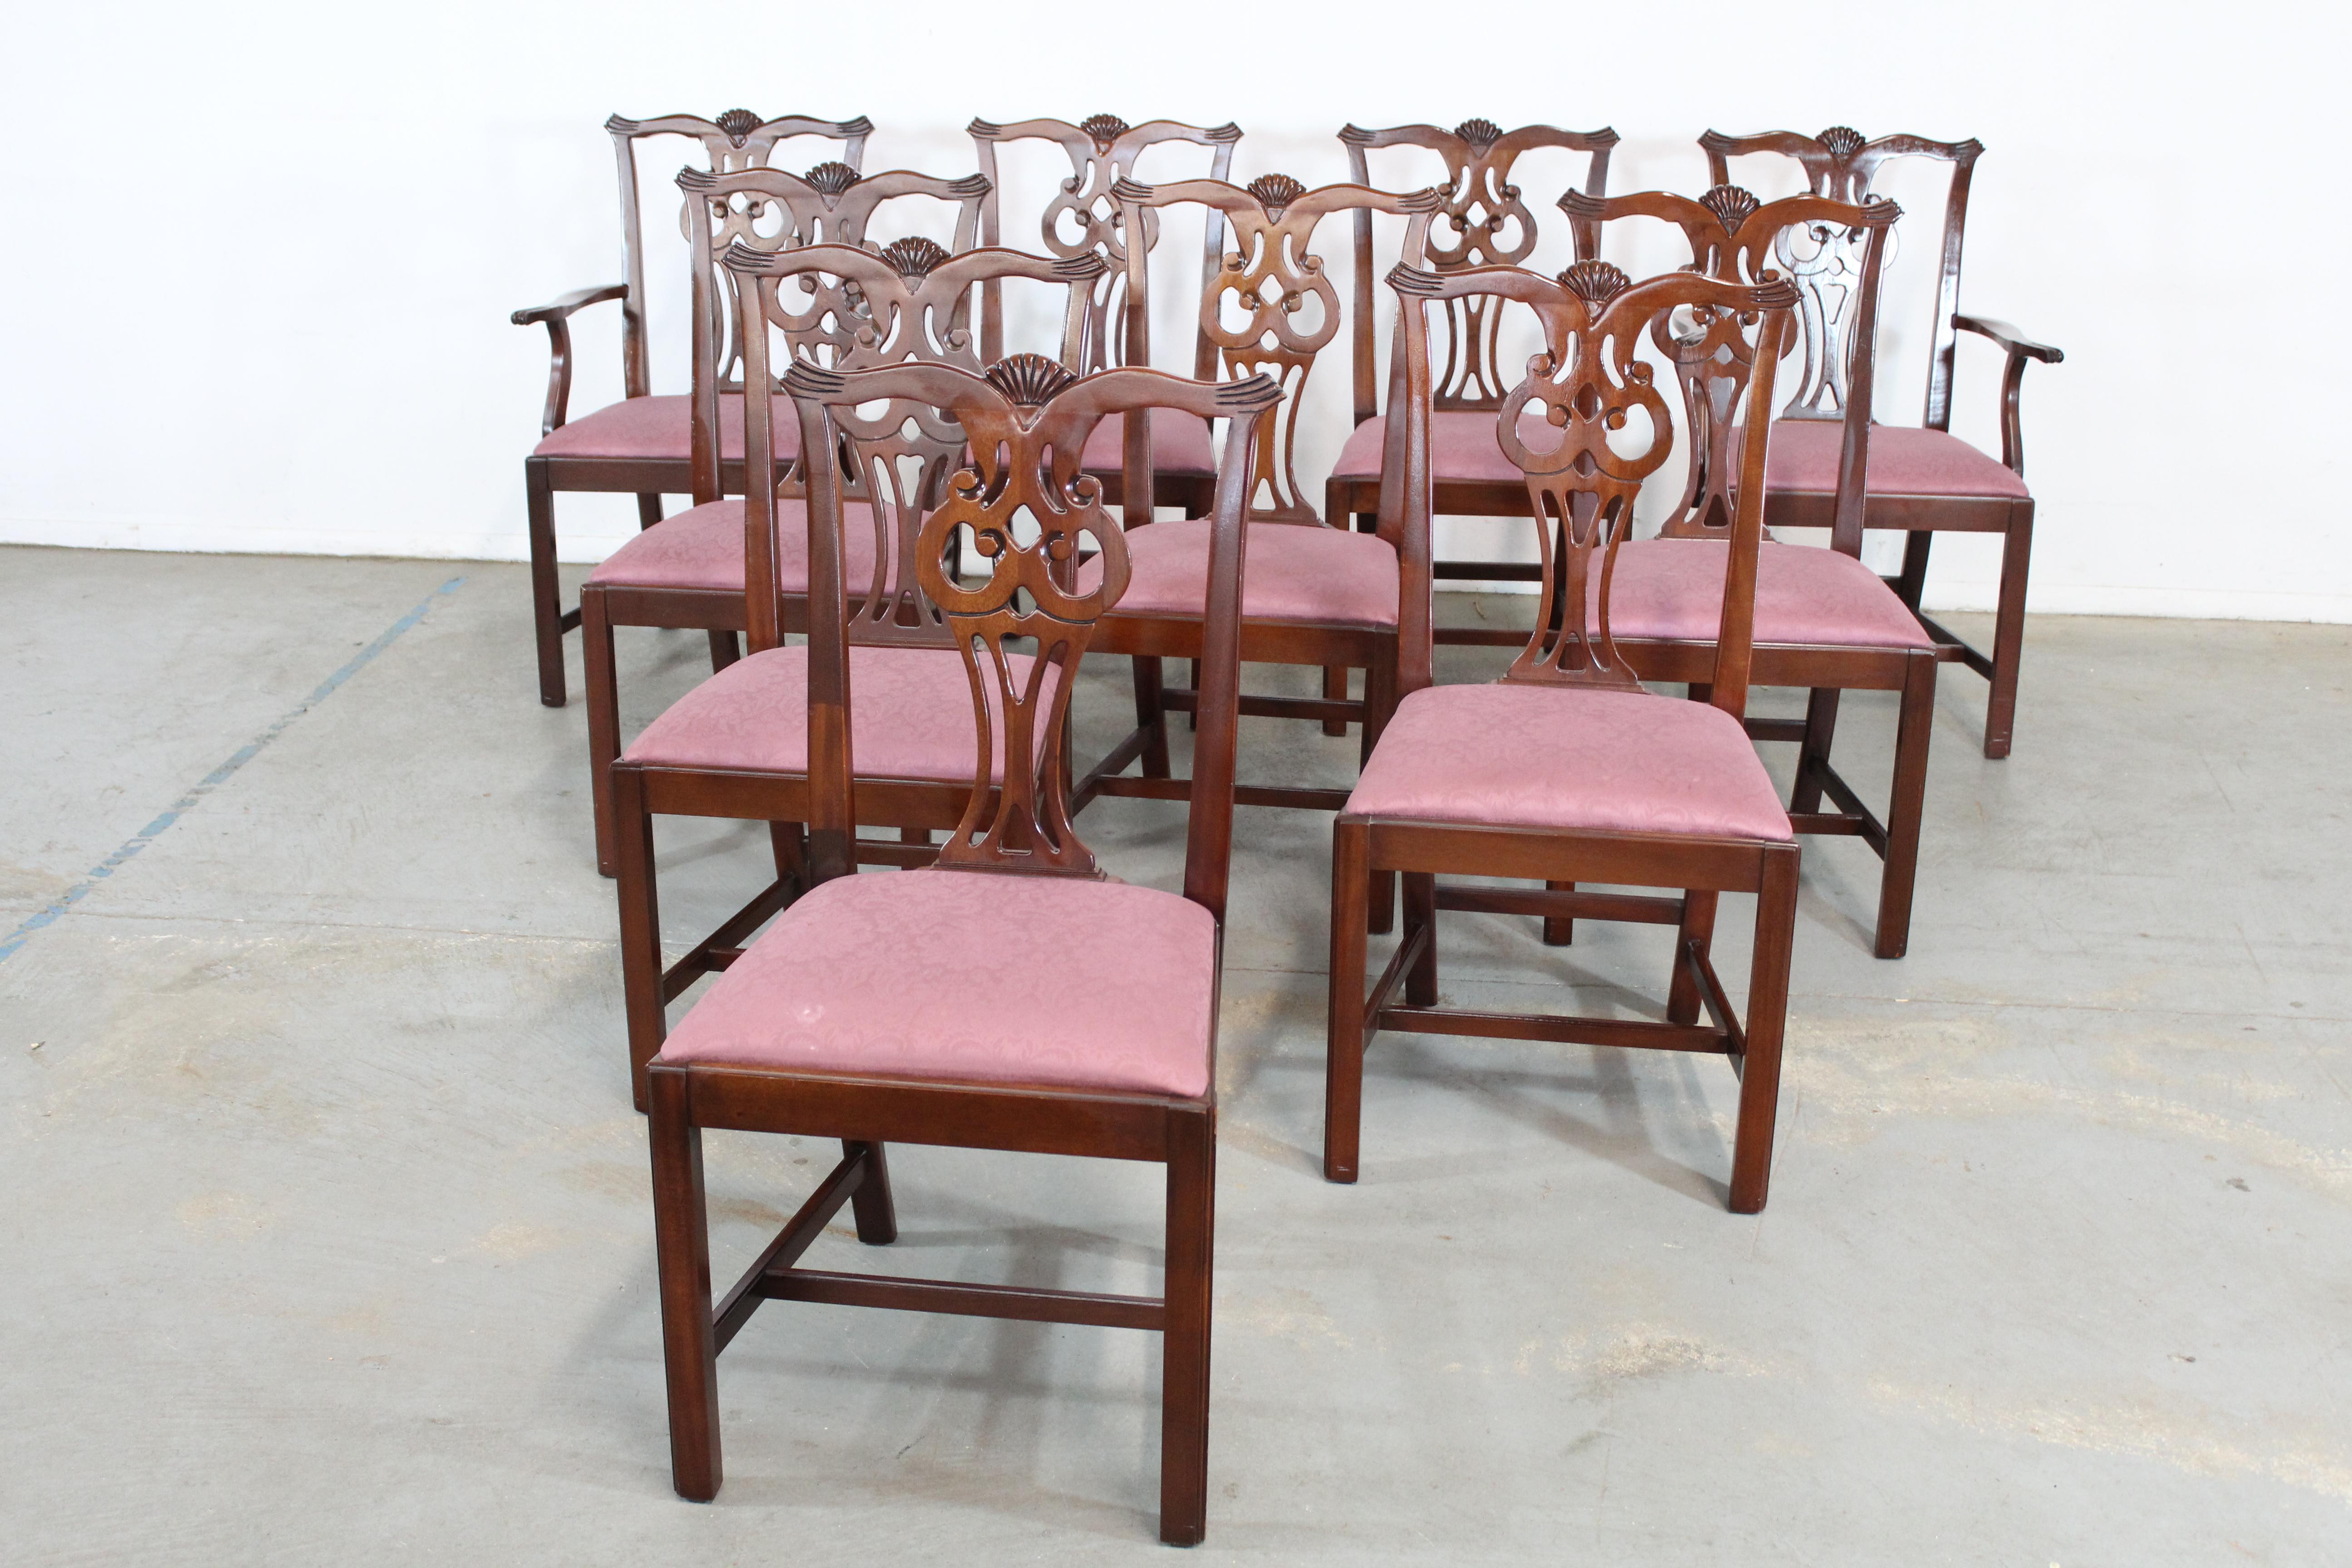 Set of 10 Chippendale solid mahogany dining side chairs by Century Furniture
Offered is a set of 10 Chippendale solid mahogany dining side chairs by Century Furniture. They are made of solid mahogany wood and have upholstered seats. In good